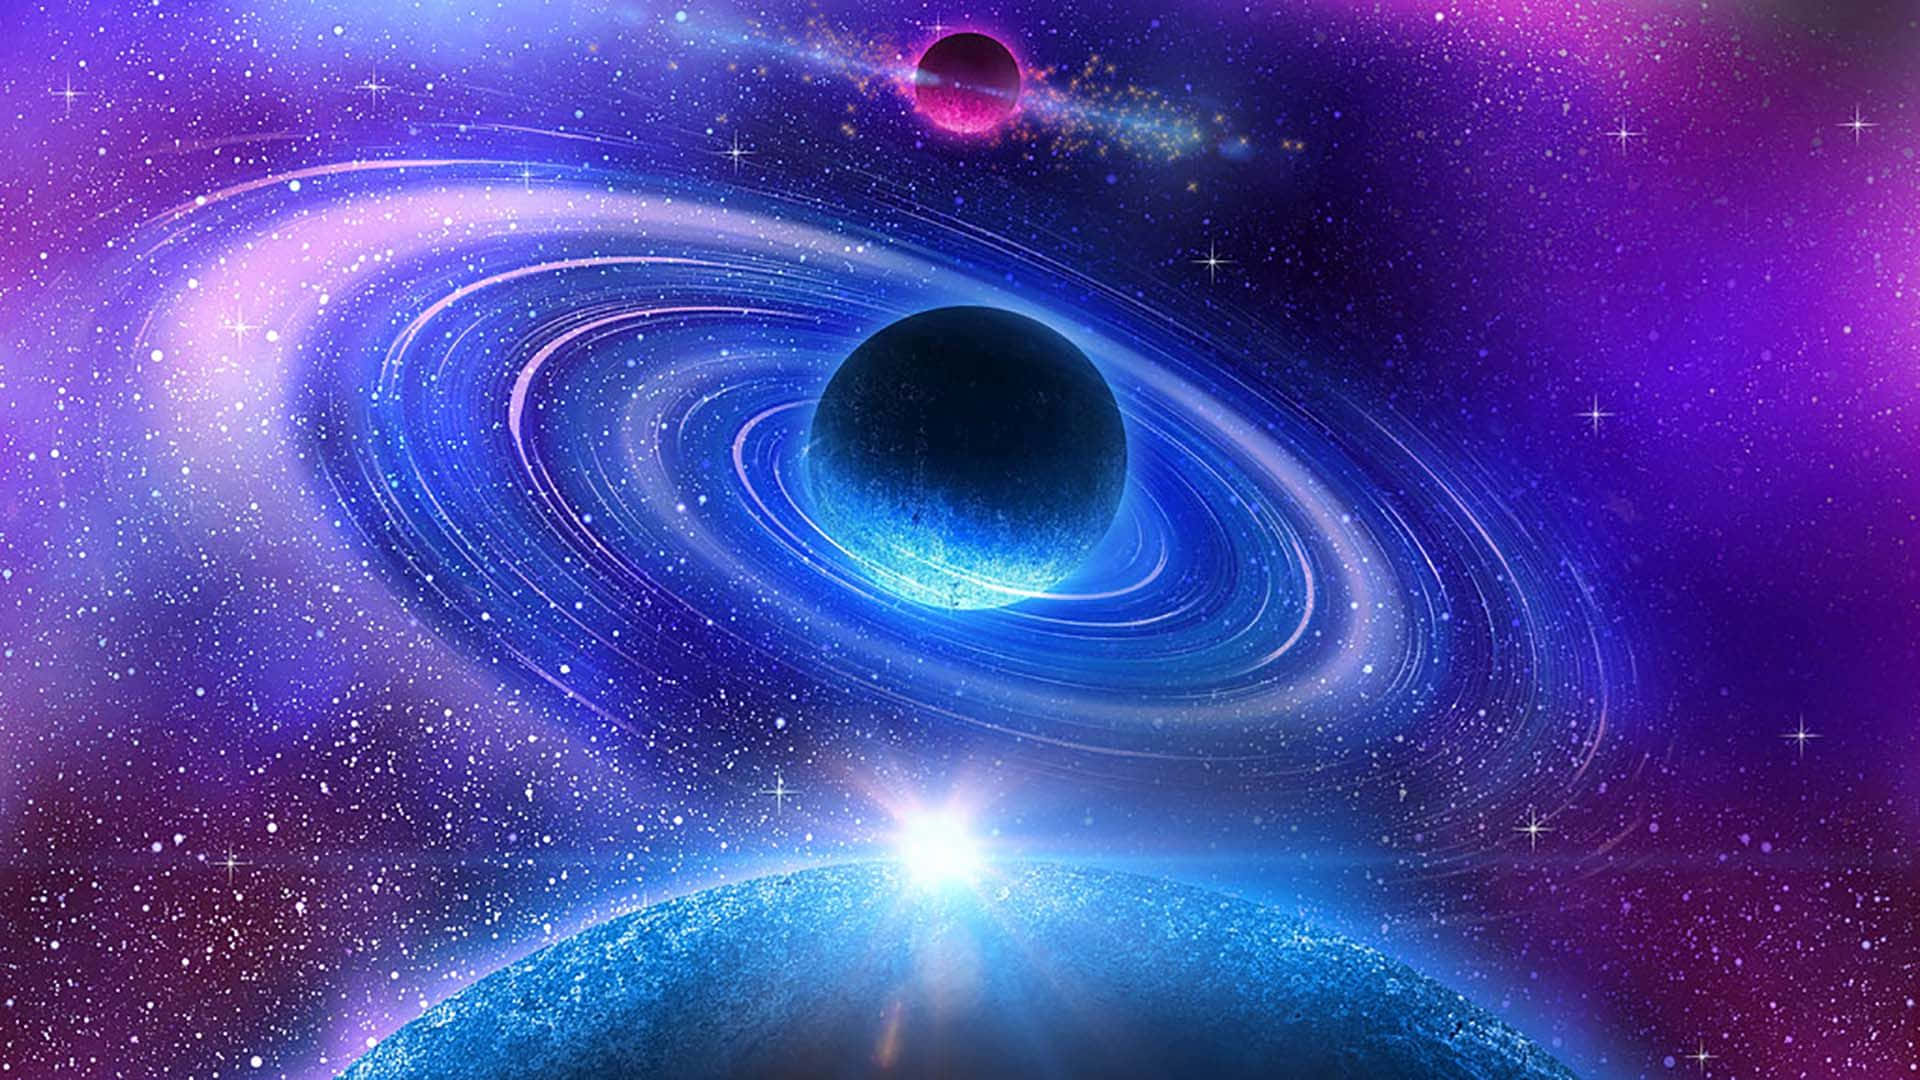 Landscape Planets Cosmic Cool Photos Background Wallpaper